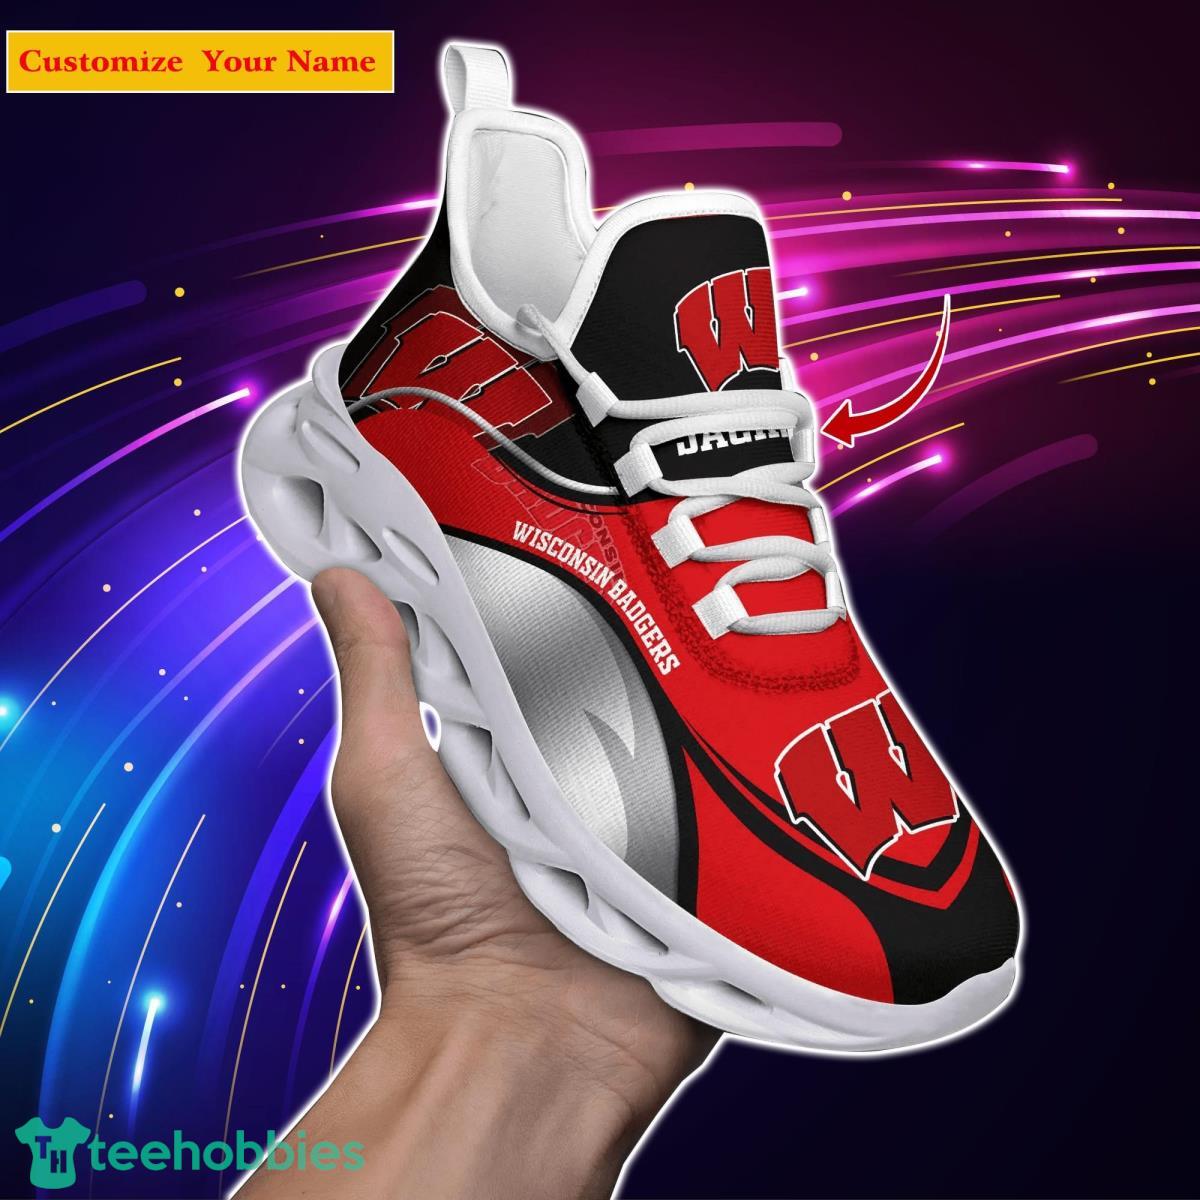 Wisconsin Badgers NCAA1 Custom Name Max Soul Shoes Unique Gift For Men Women Fans Product Photo 1